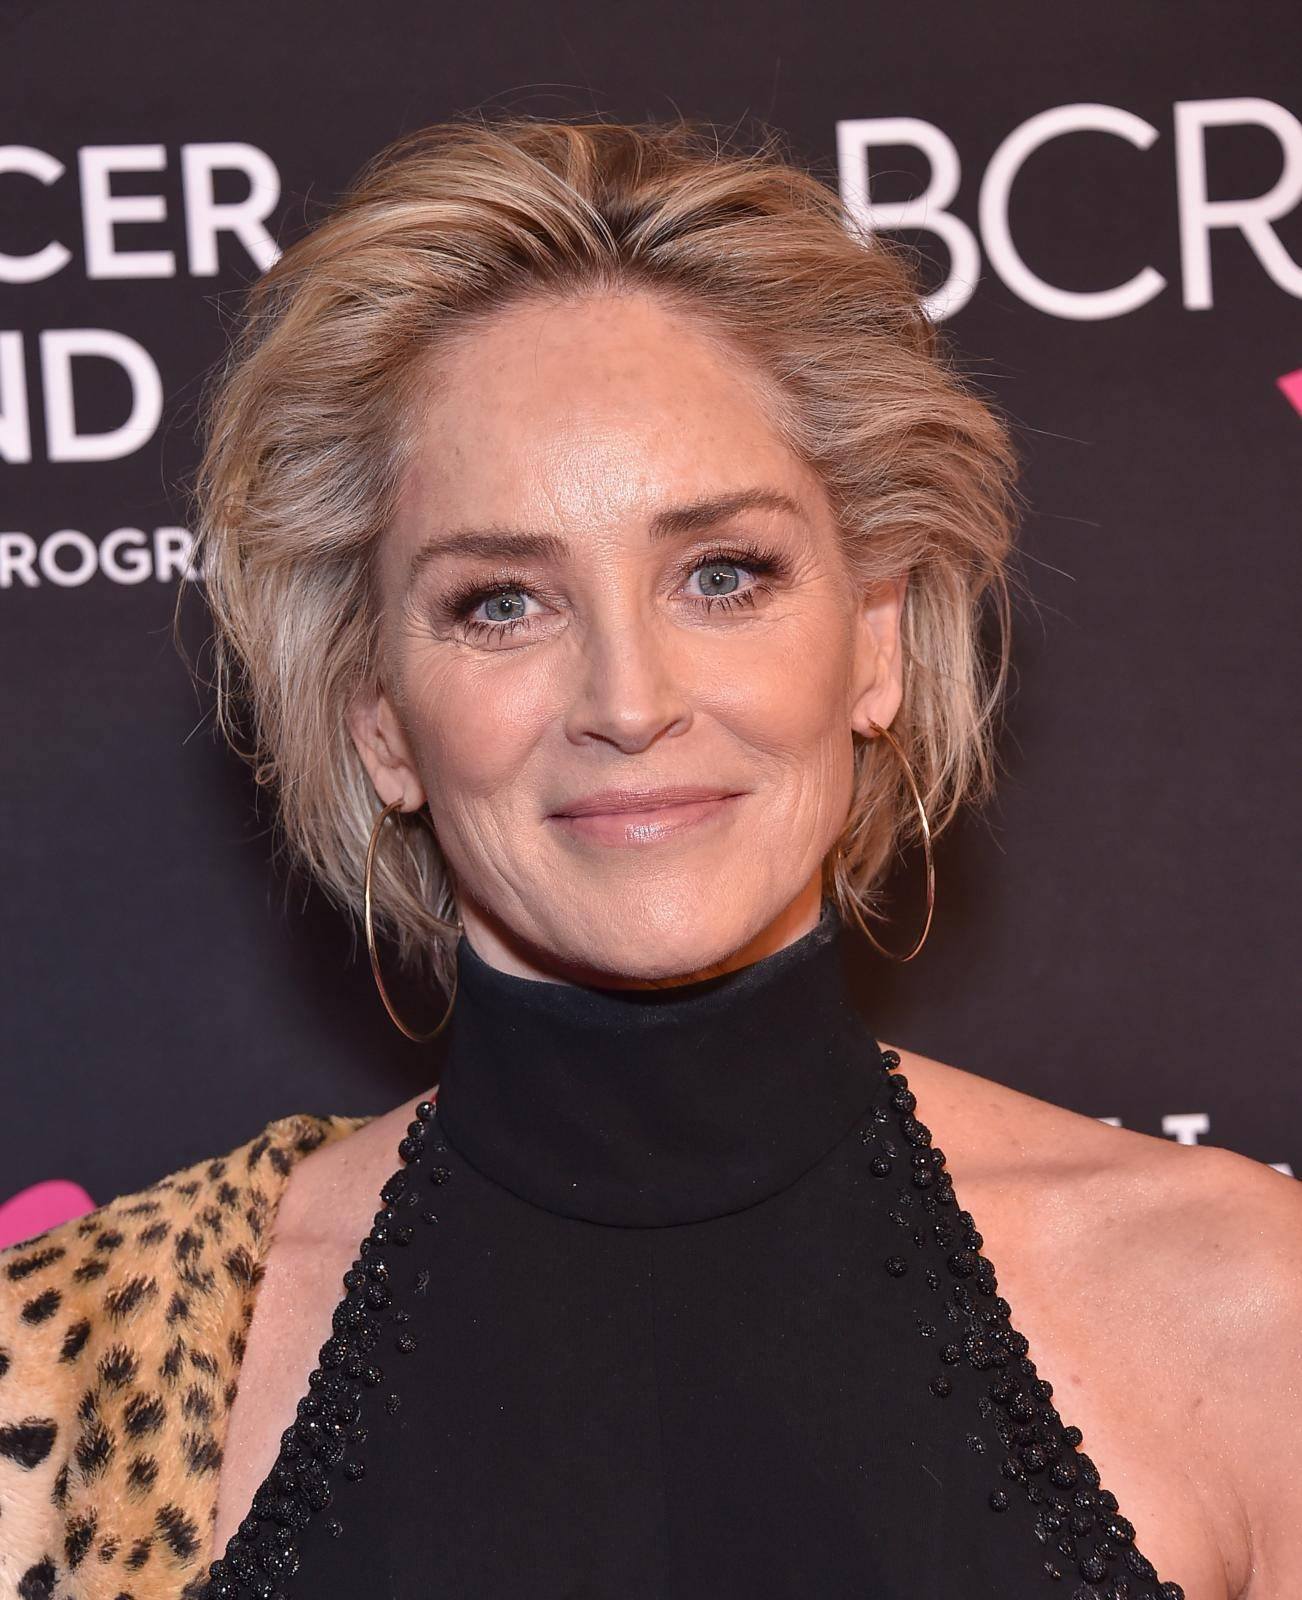 The Women's Cancer Research Fund's An Unforgettable Evening Benefit Gala - Los Angeles